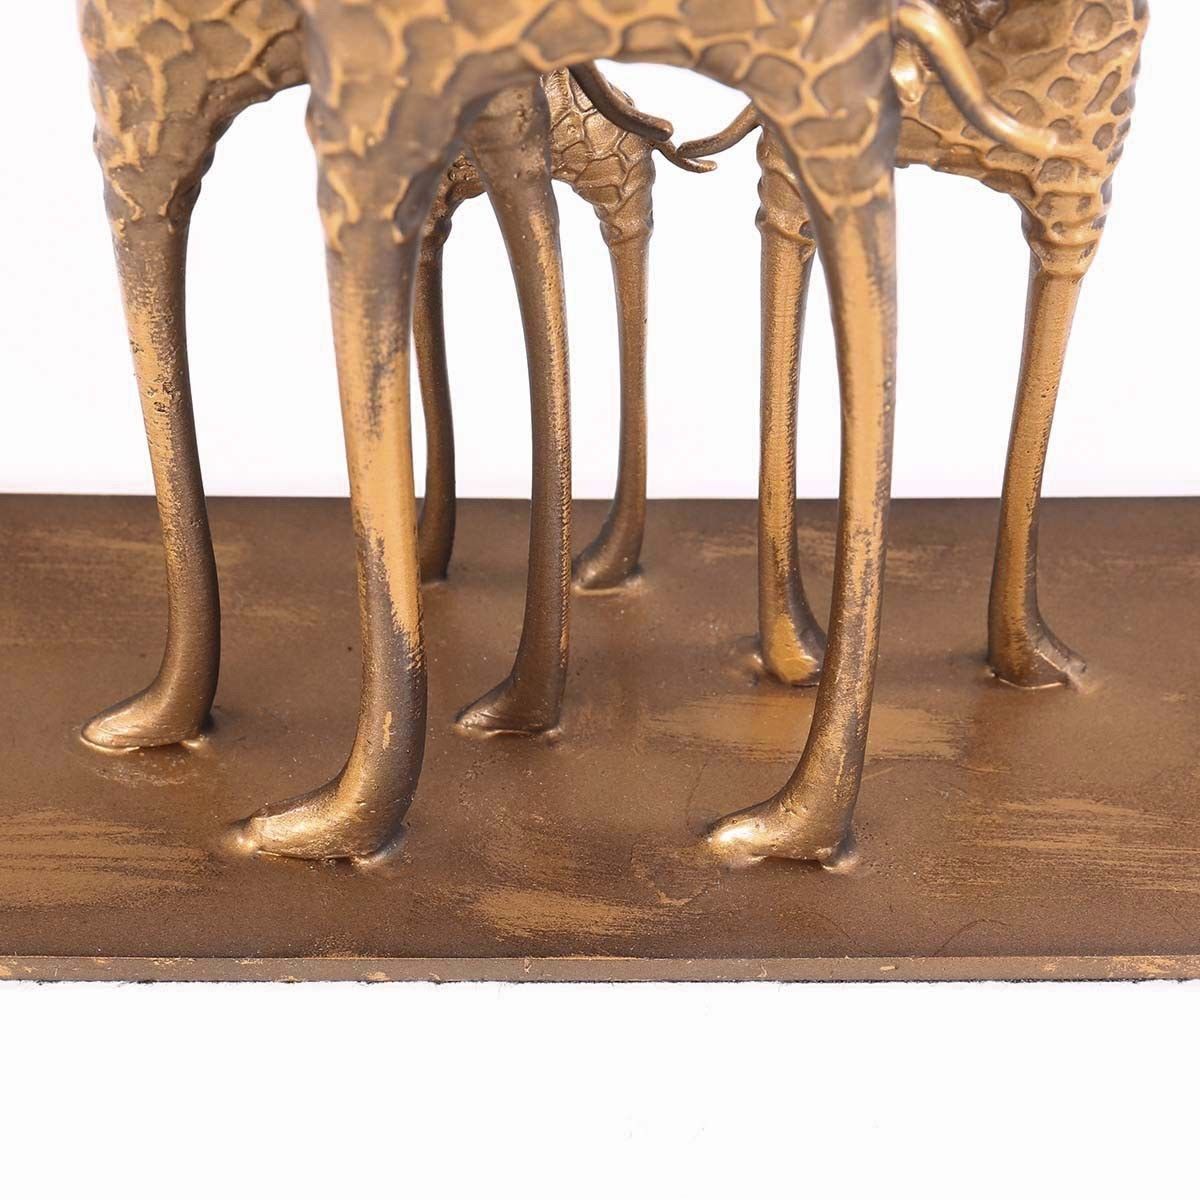 Giraffe Statue Decor: Form of Pure Happiness Created by the Family